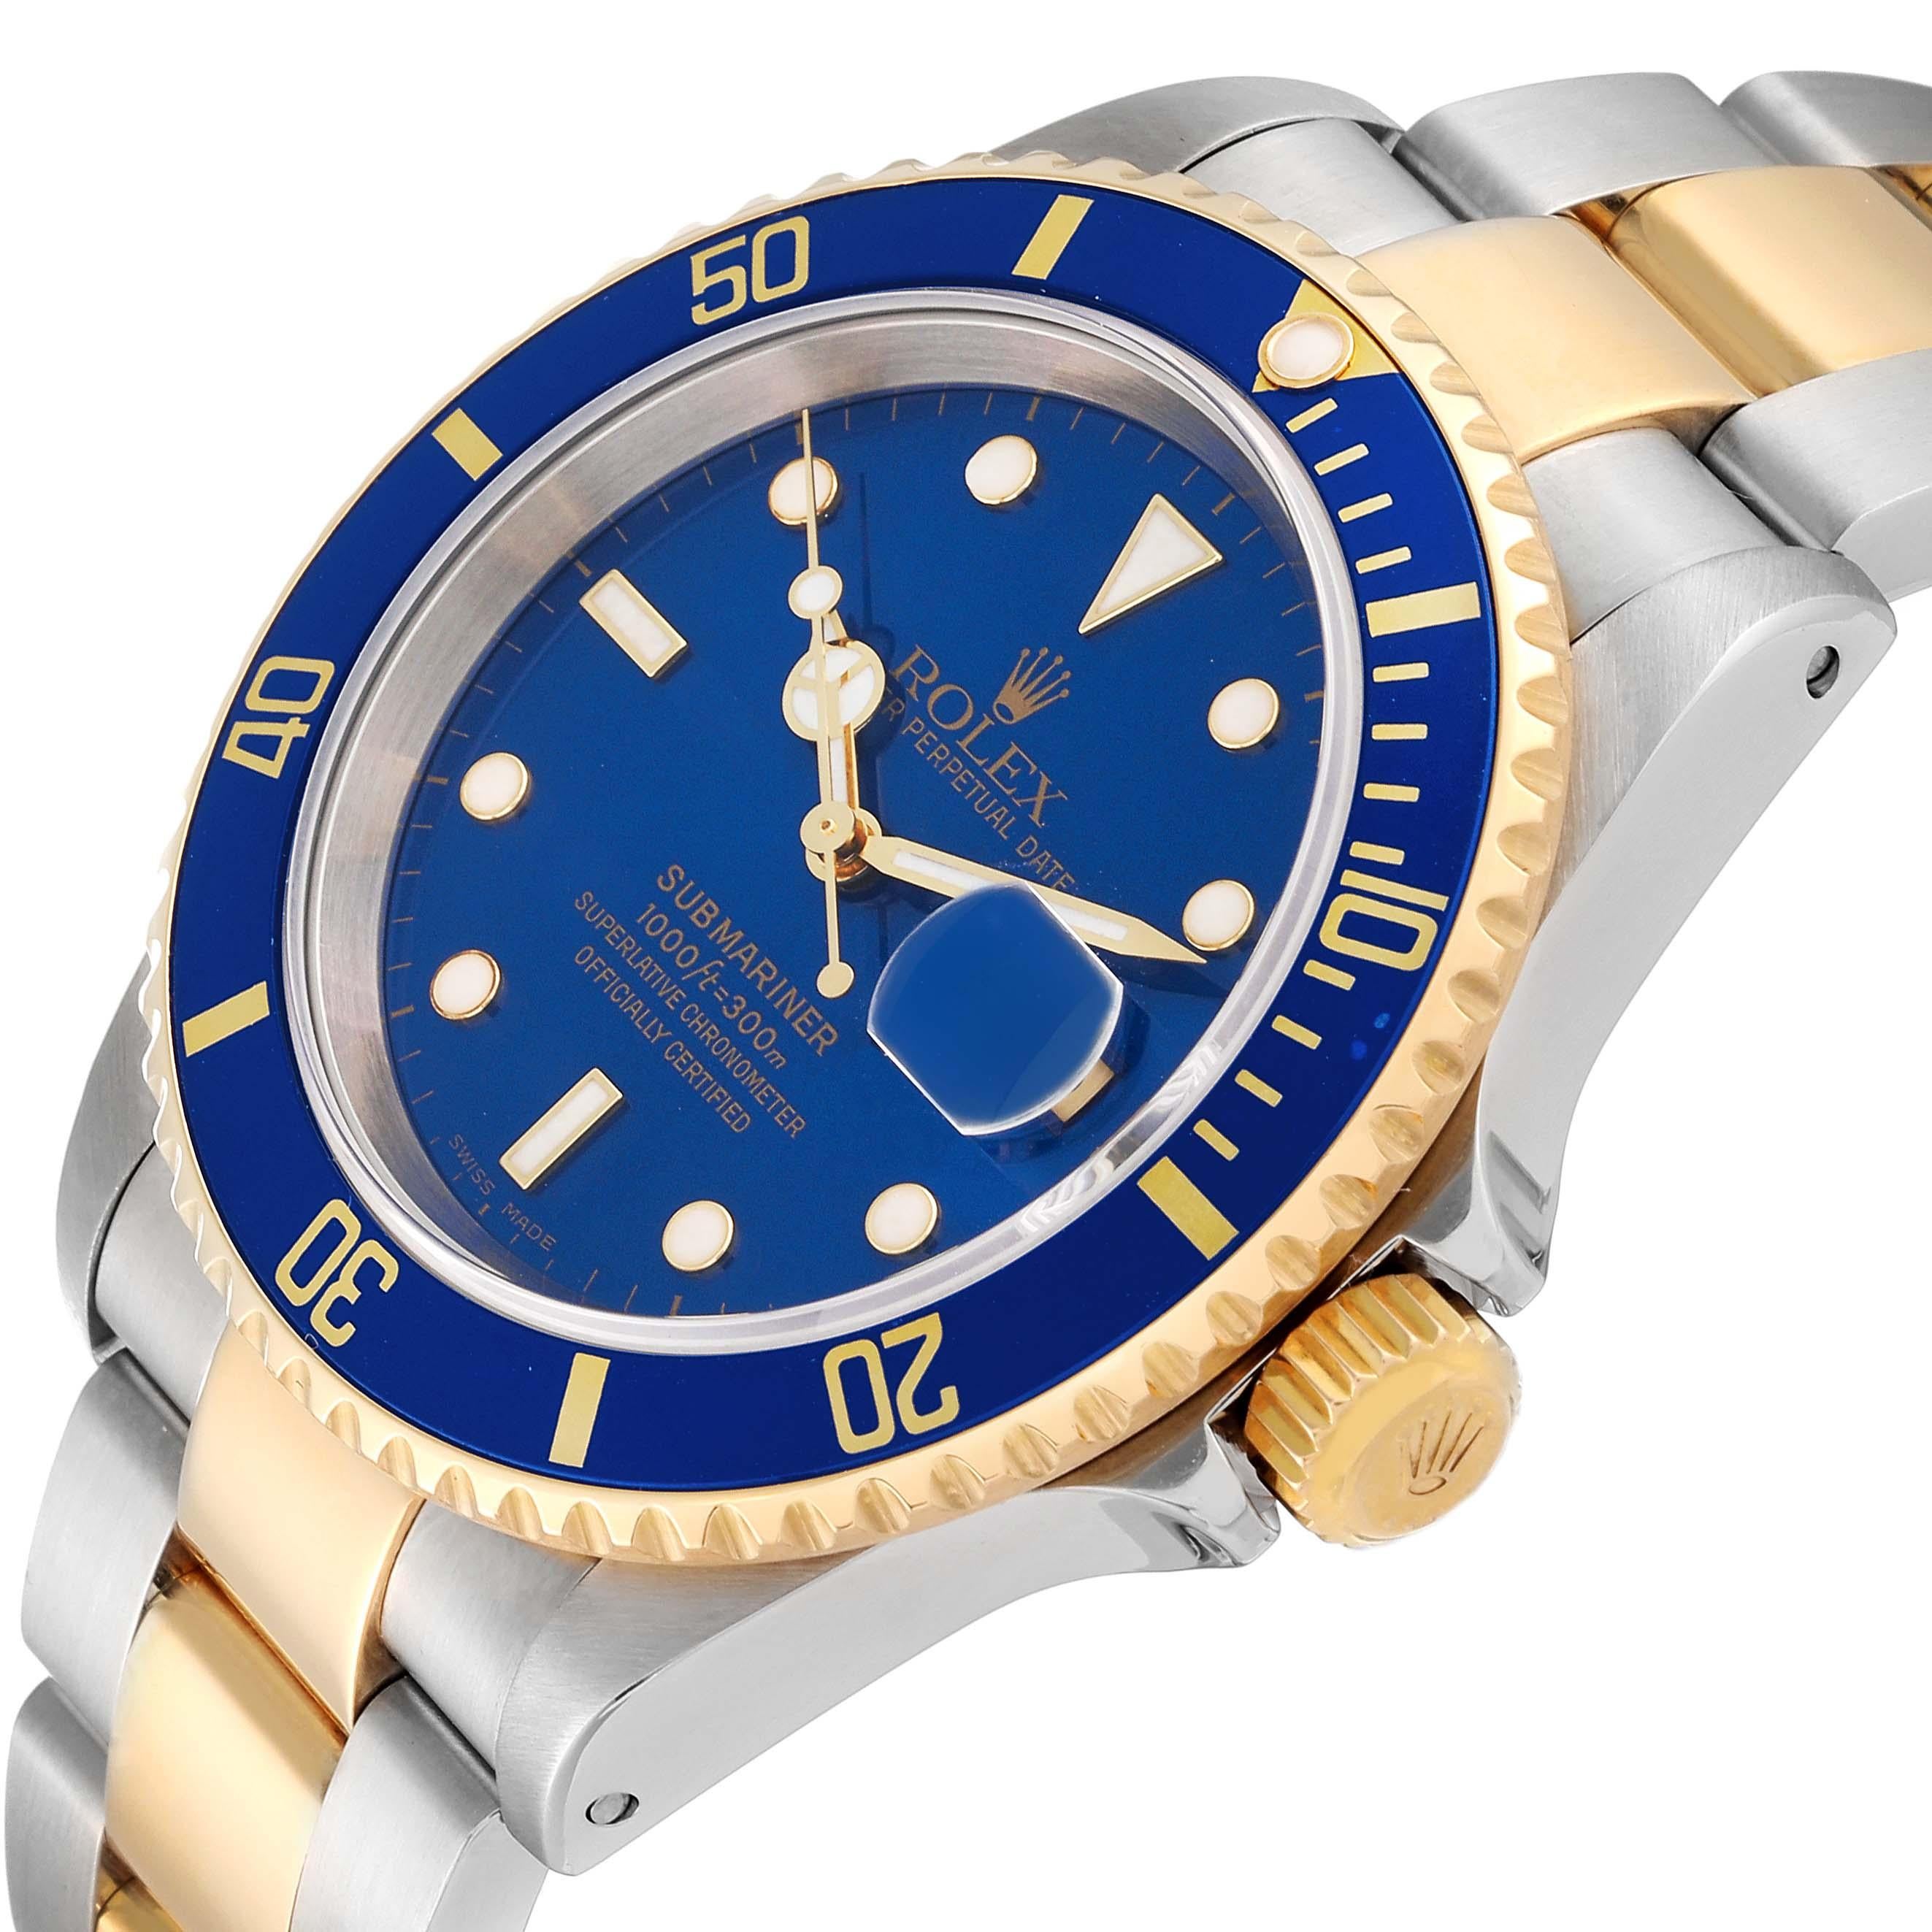 Men's Rolex Submariner Blue Dial Steel Yellow Gold Mens Watch 16613 Box Papers